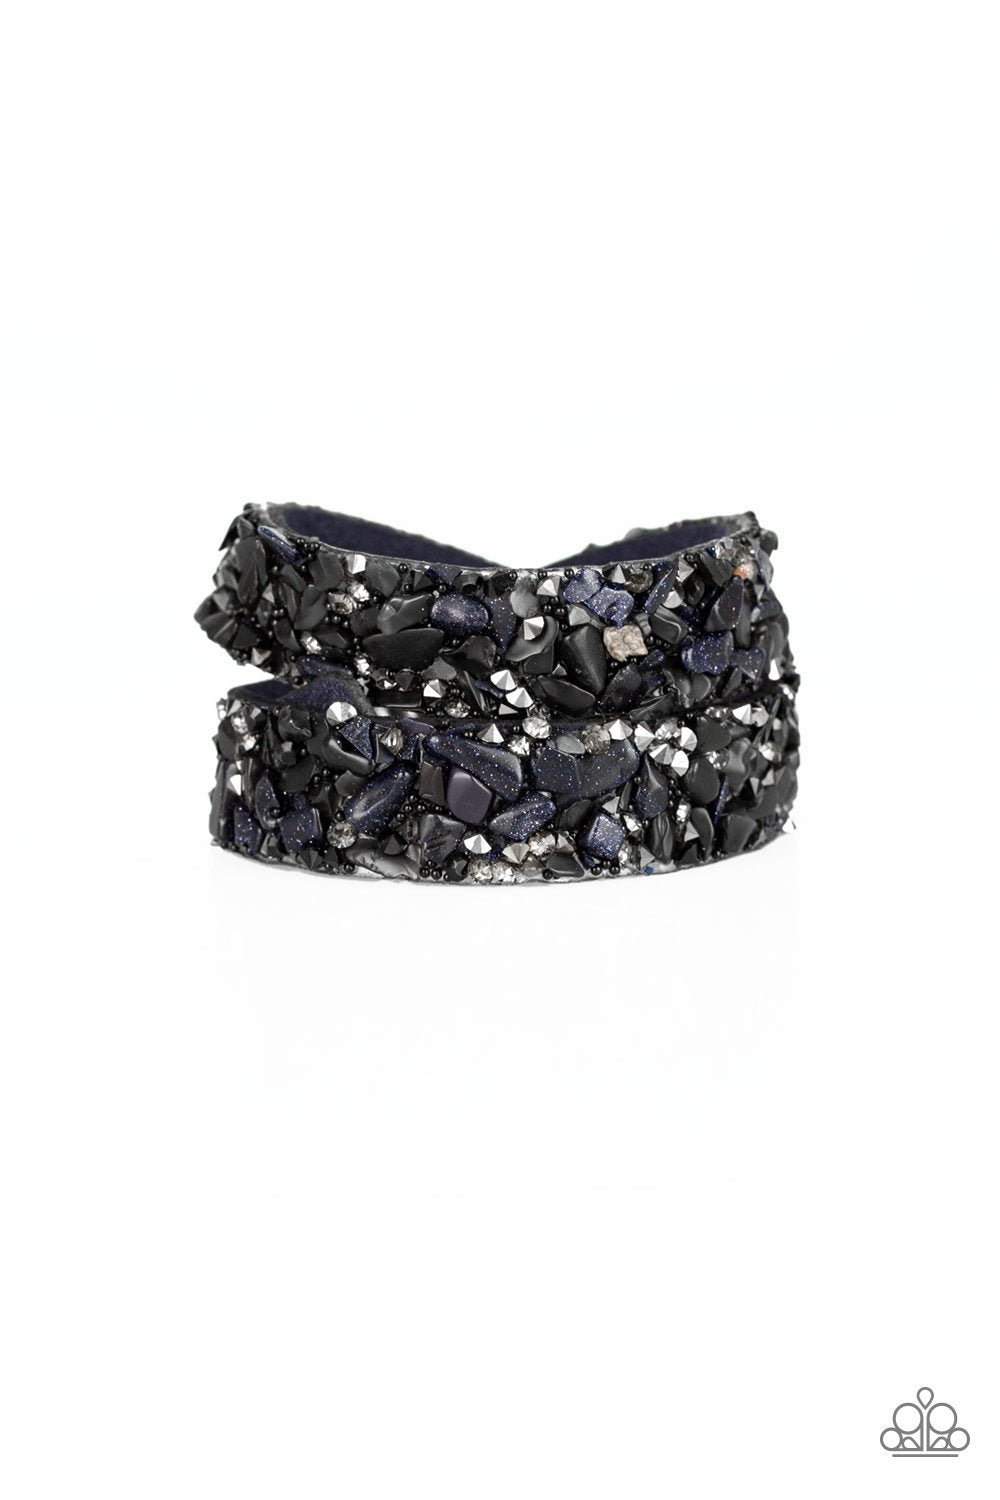 Crush Hour Blue Suede and Stone Double Wrap Snap Bracelet - Paparazzi Accessories-CarasShop.com - $5 Jewelry by Cara Jewels